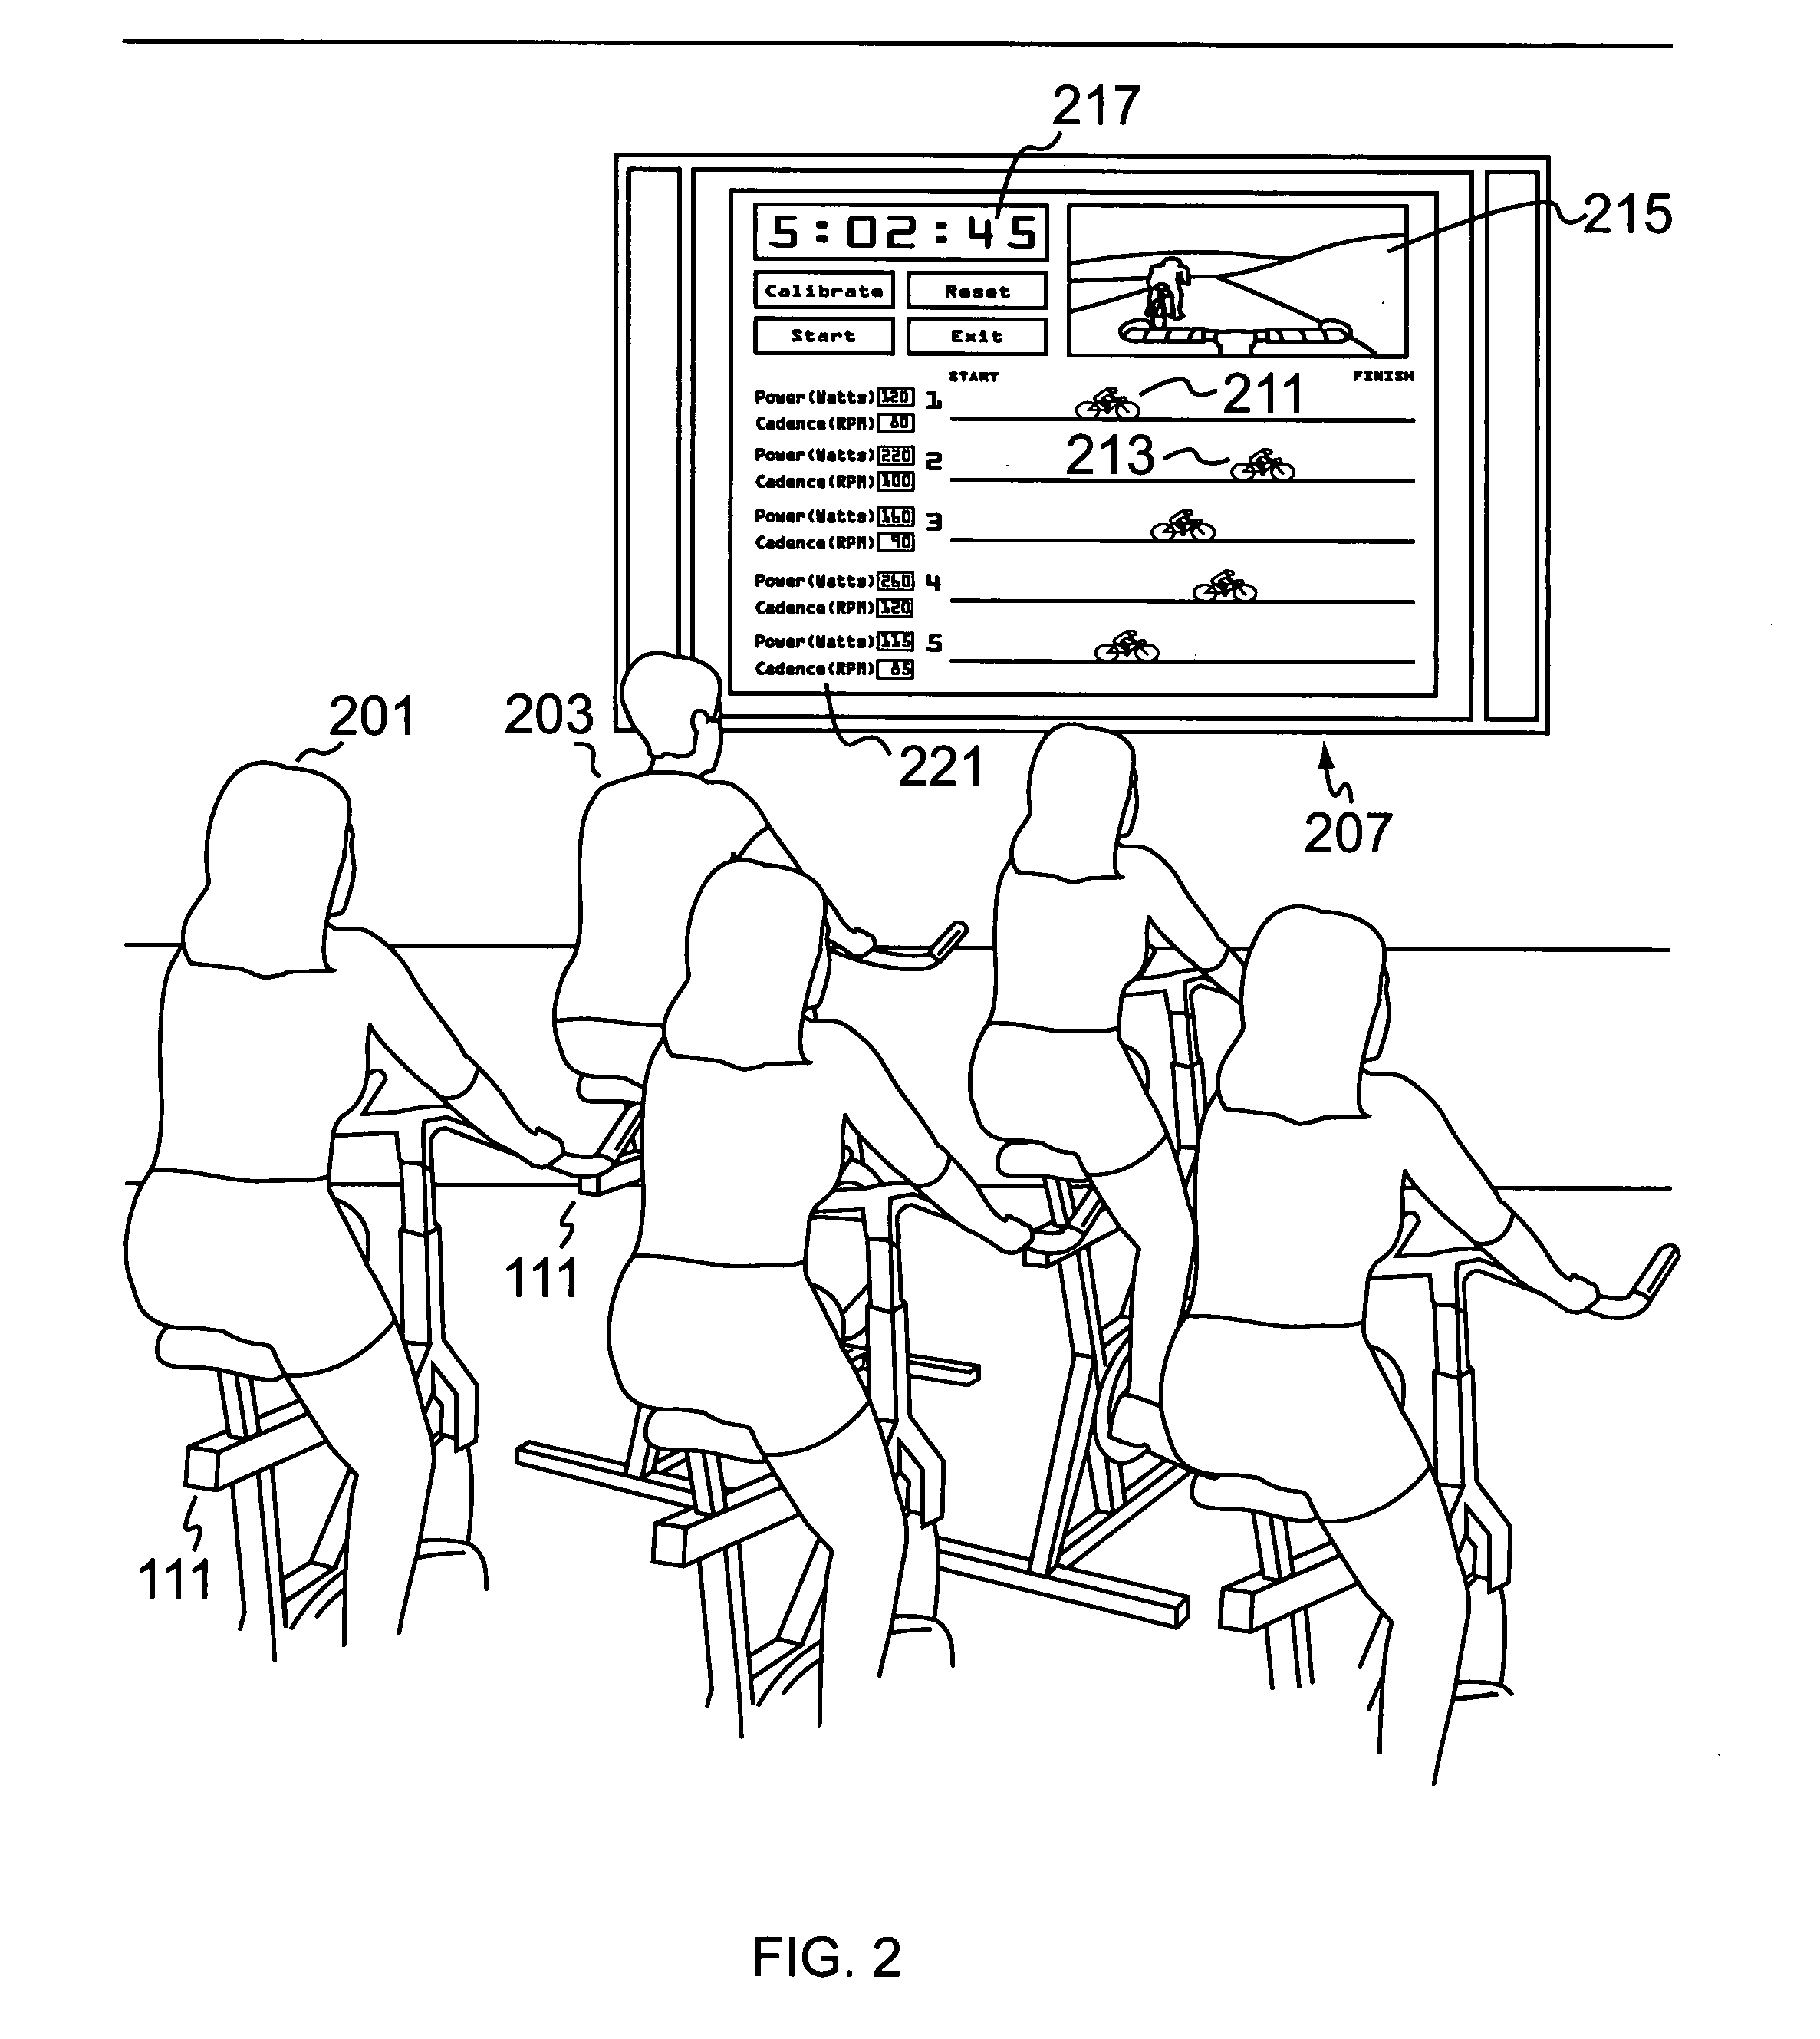 Method and apparatus for measuring exercise performance